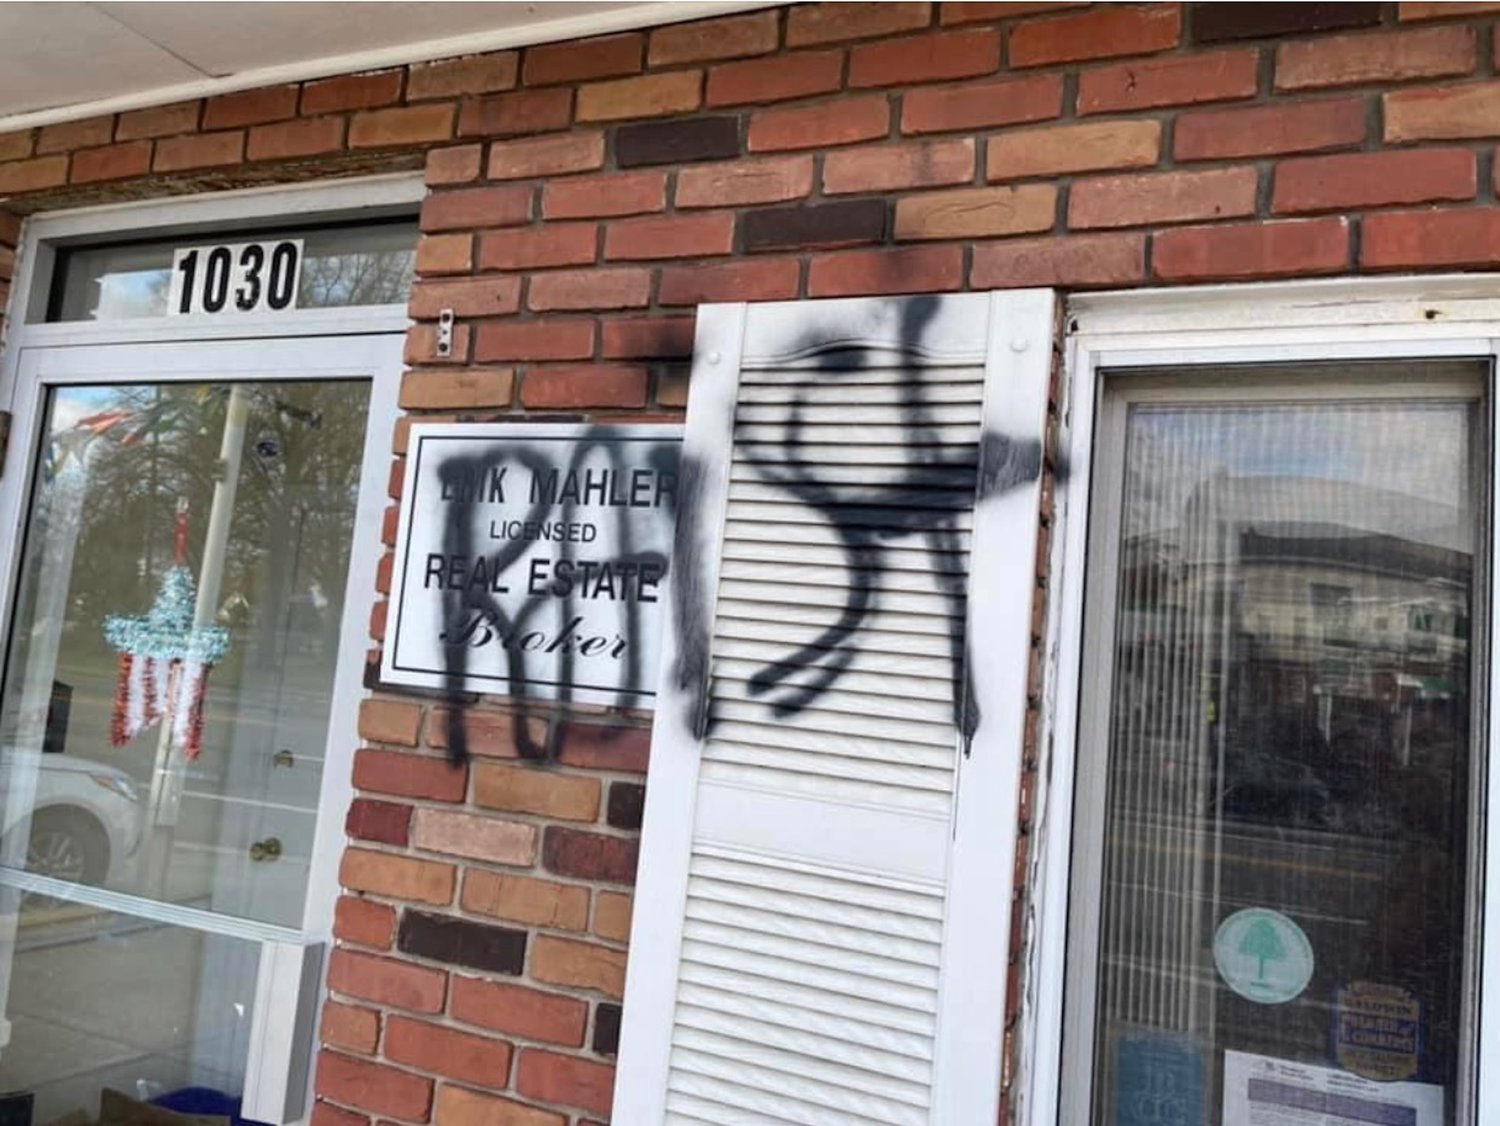 The word “Raist” — a misspelling of “racist” — was graffitied on the front entrance of Mahler Realty on Merrick Road in the early hours of Nov. 27.